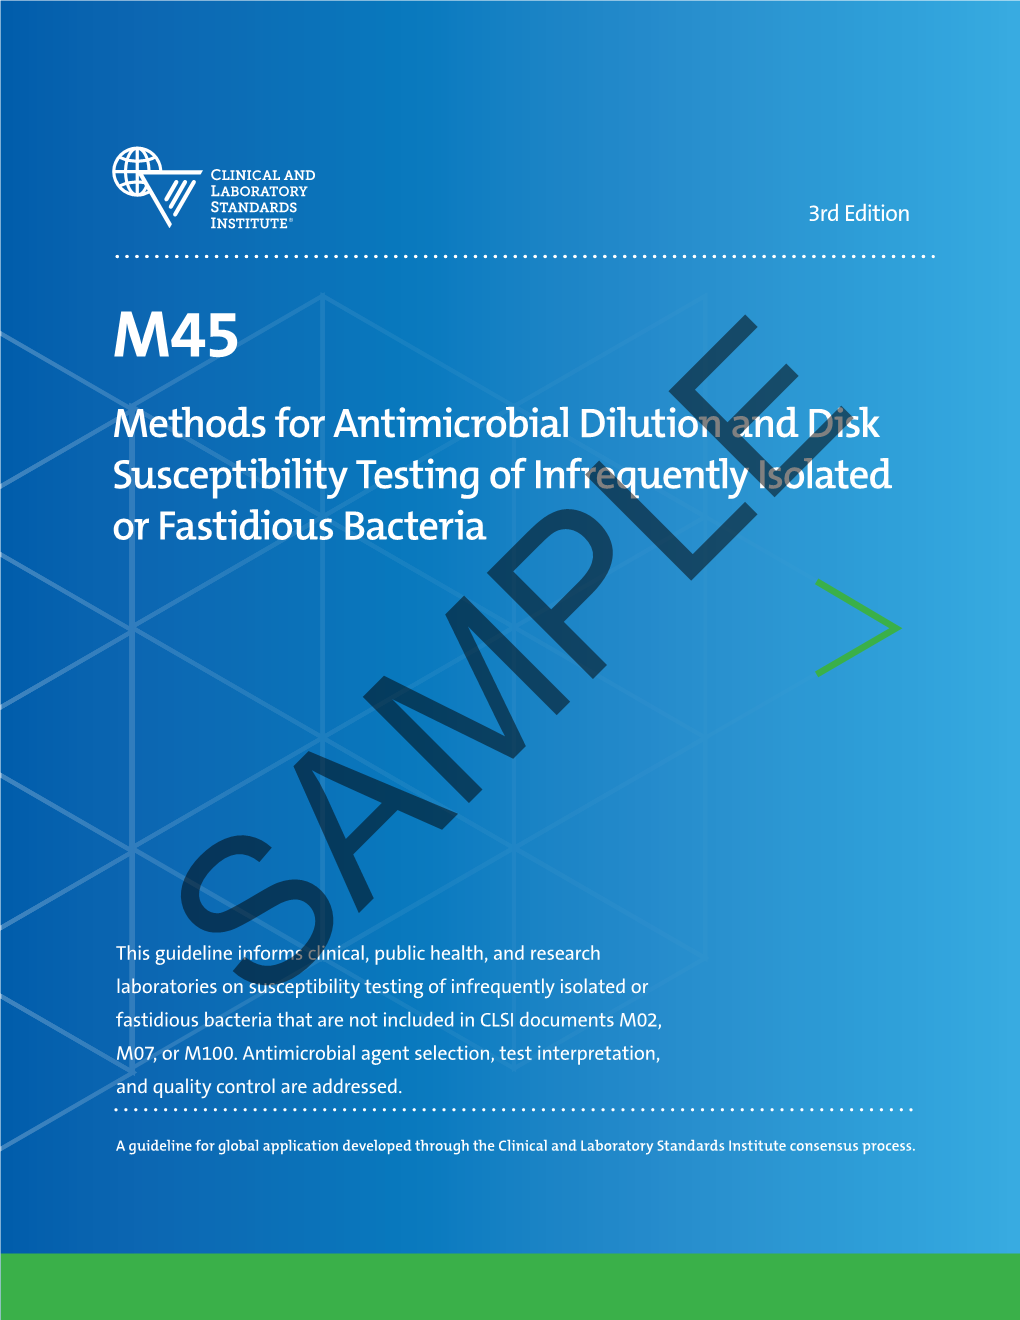 Methods for Antimicrobial Dilution and Disk Susceptibility Testing of Infrequently Isolated Or Fastidious Bacteria